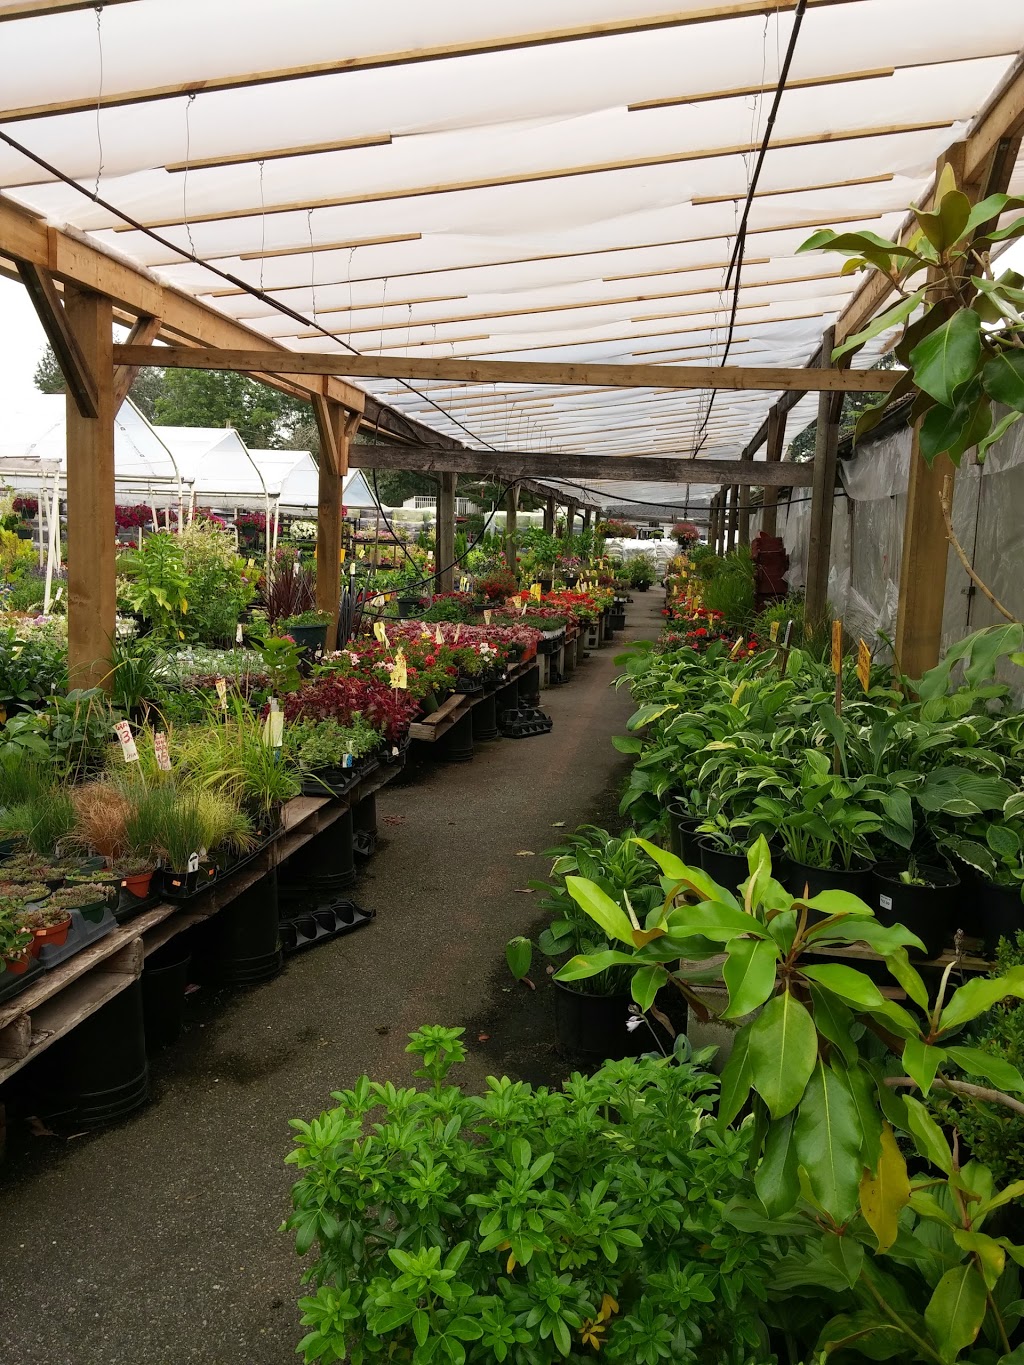 Bens Farm and Garden Center | store | 18341 Fraser Hwy, Surrey, BC V3S 8H6, Canada | 6045744135 OR +1 604-574-4135